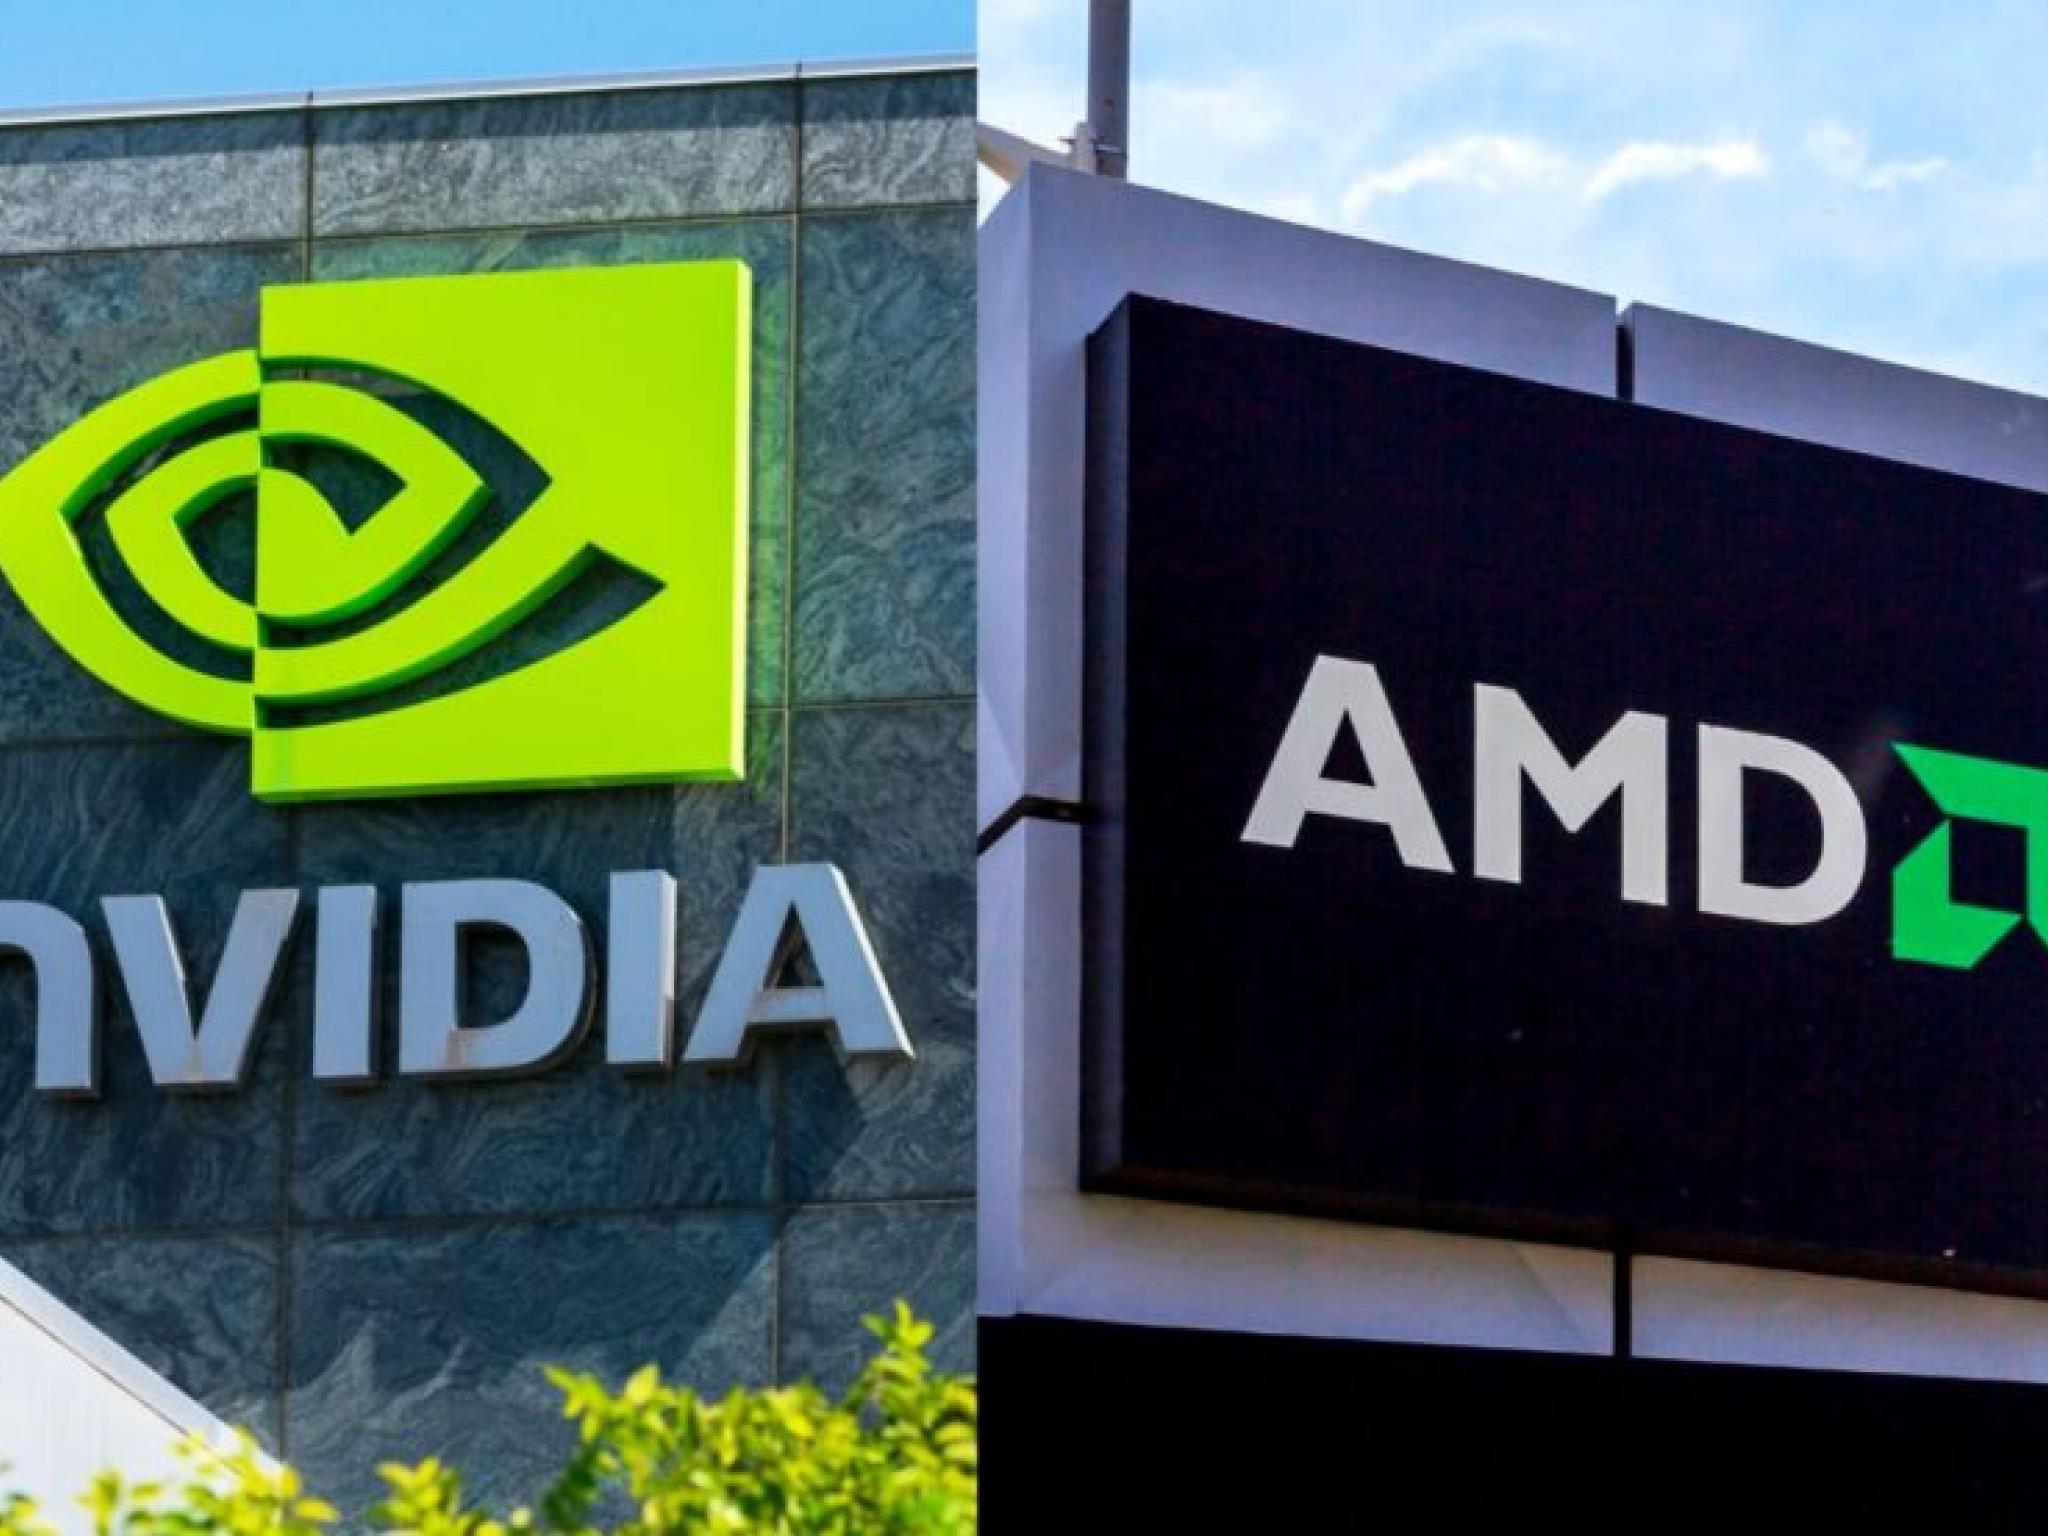  jensen-huangs-nvidia-to-remain-top-dog-in-ai-chip-battle-amd-to-get-a-slice-predicts-tech-investor-paul-meeks 